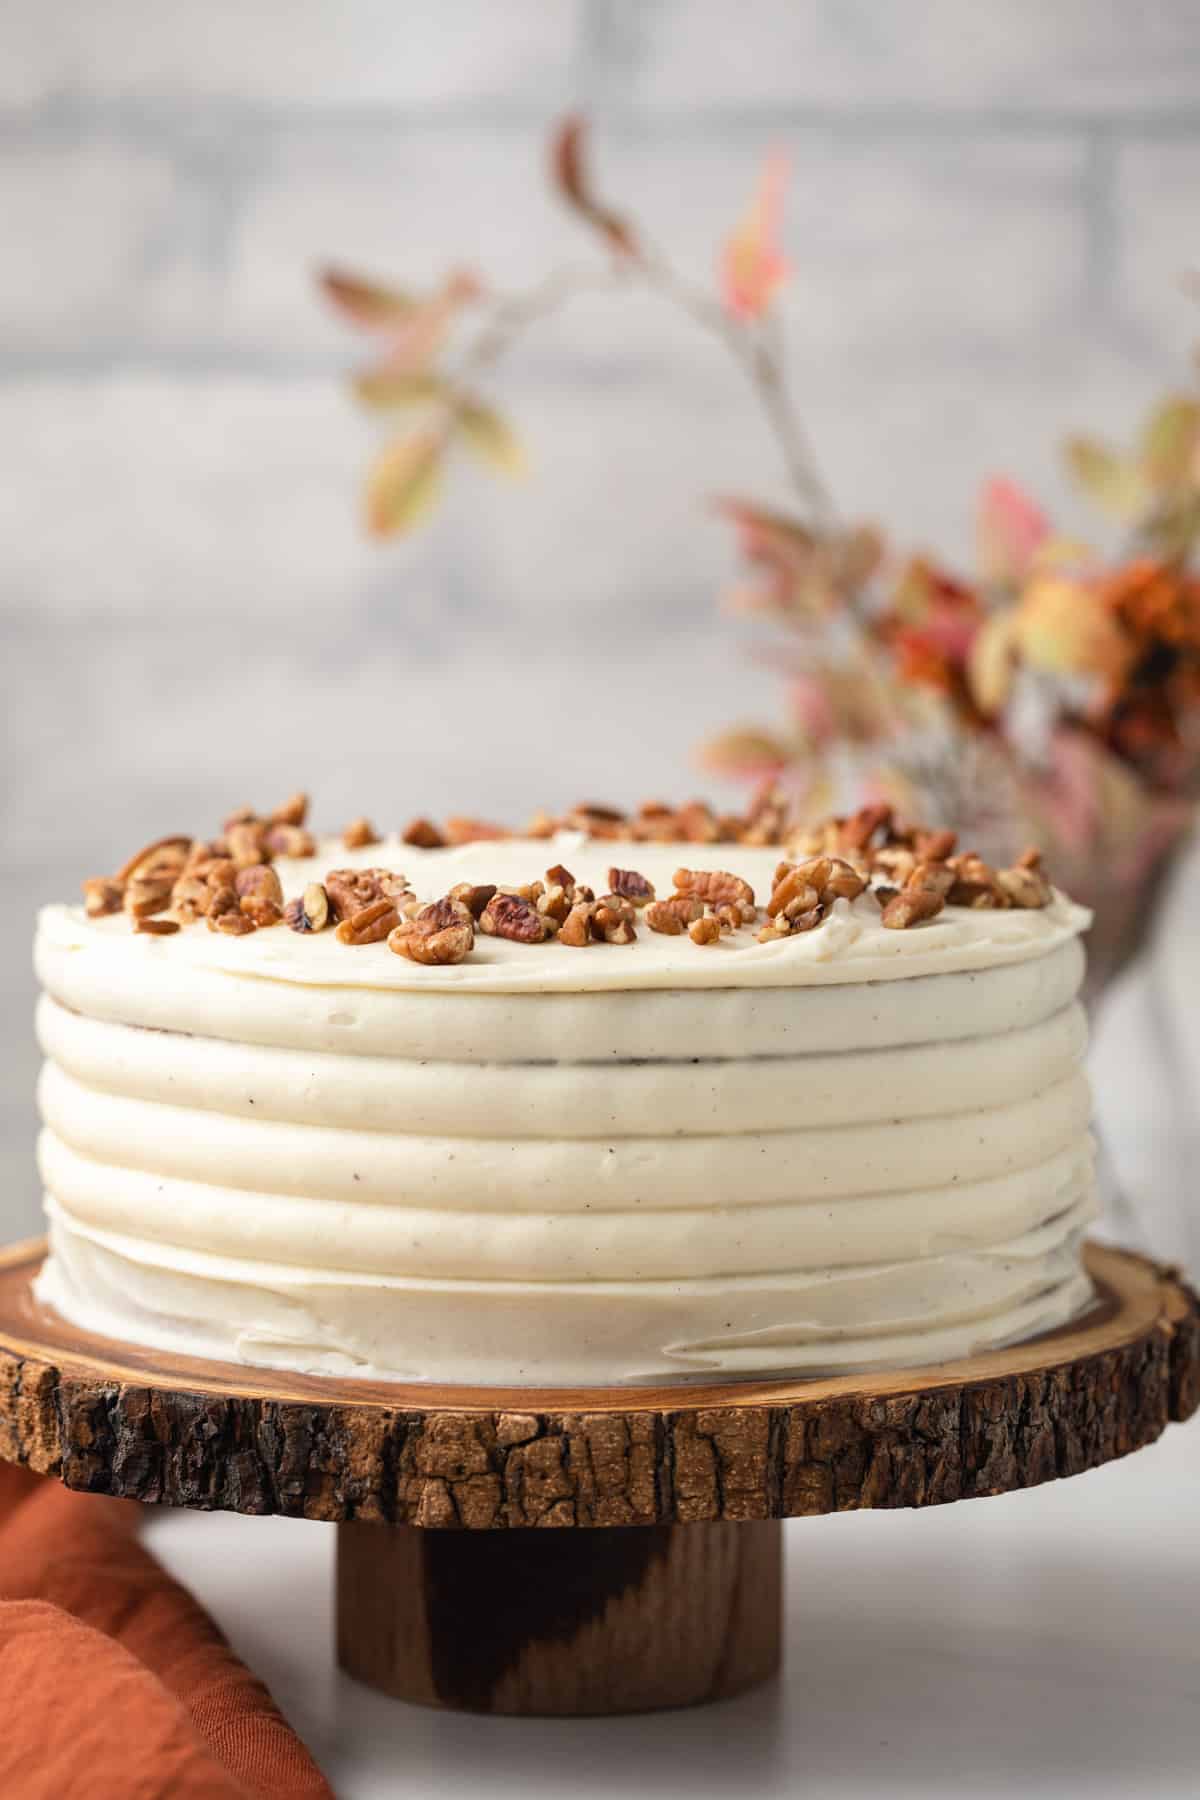 Spice cake on brown cake stand.